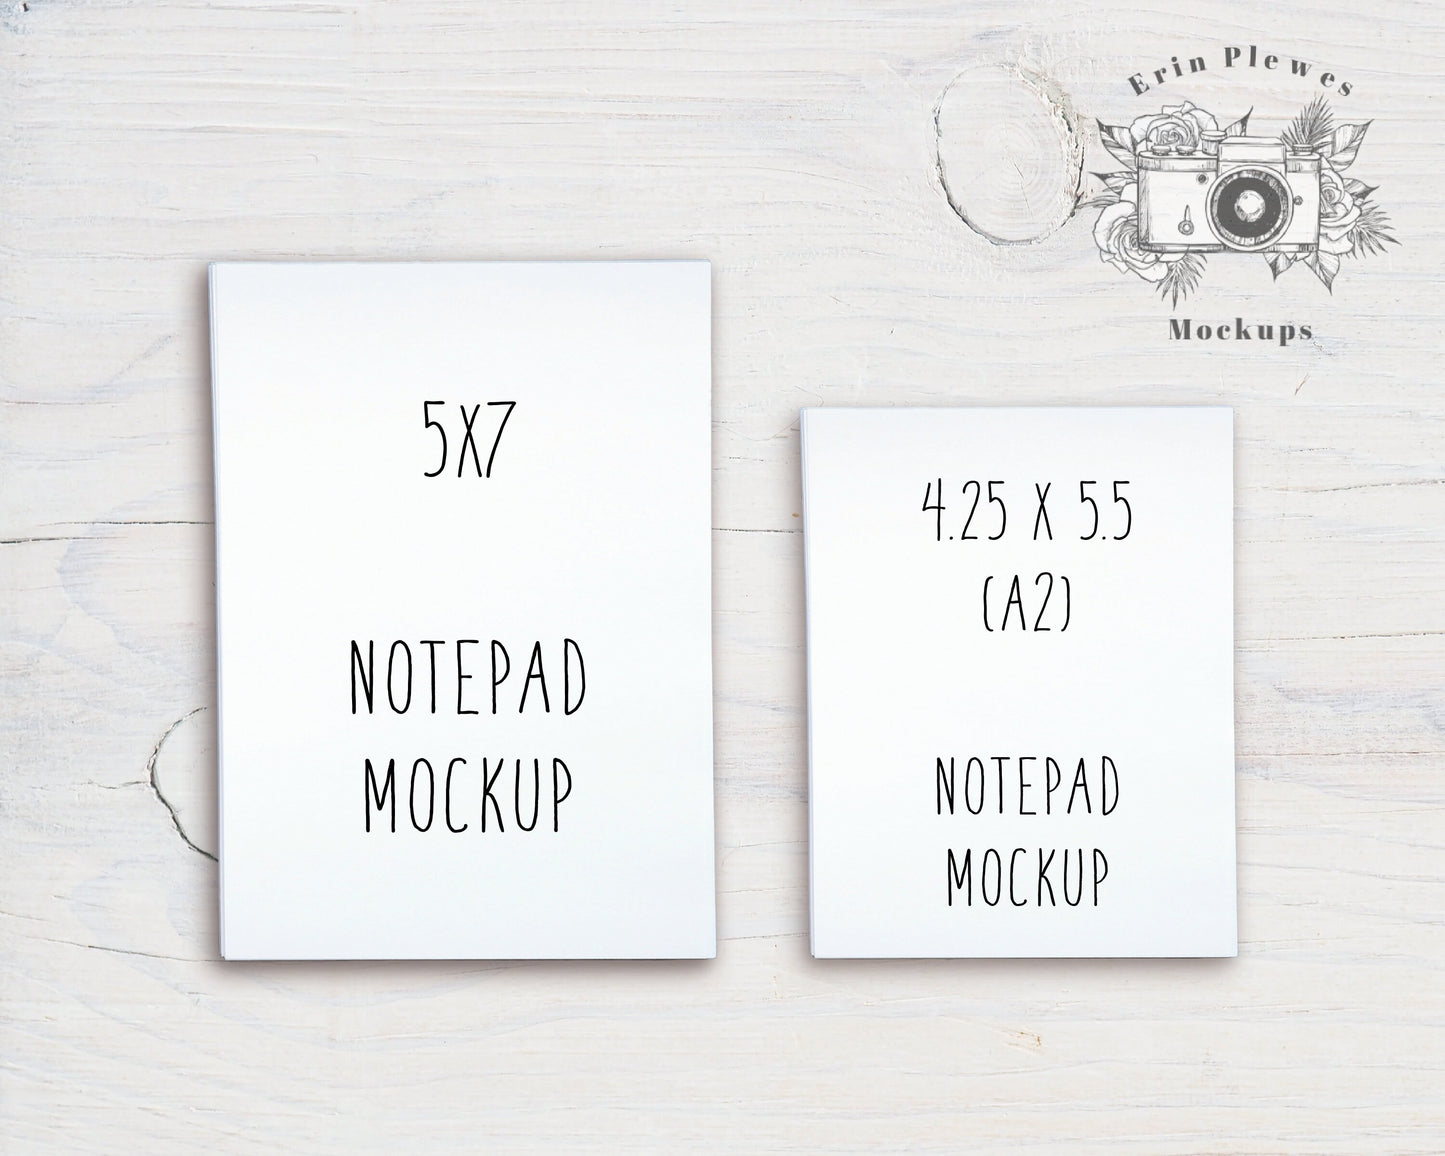 Notepad Mockup 5"x7" and 4.25"x5.5", To Do List Mock Up, A2 and A7 Minimalist Stationery Flatlay, Instant Digital Download Jpeg